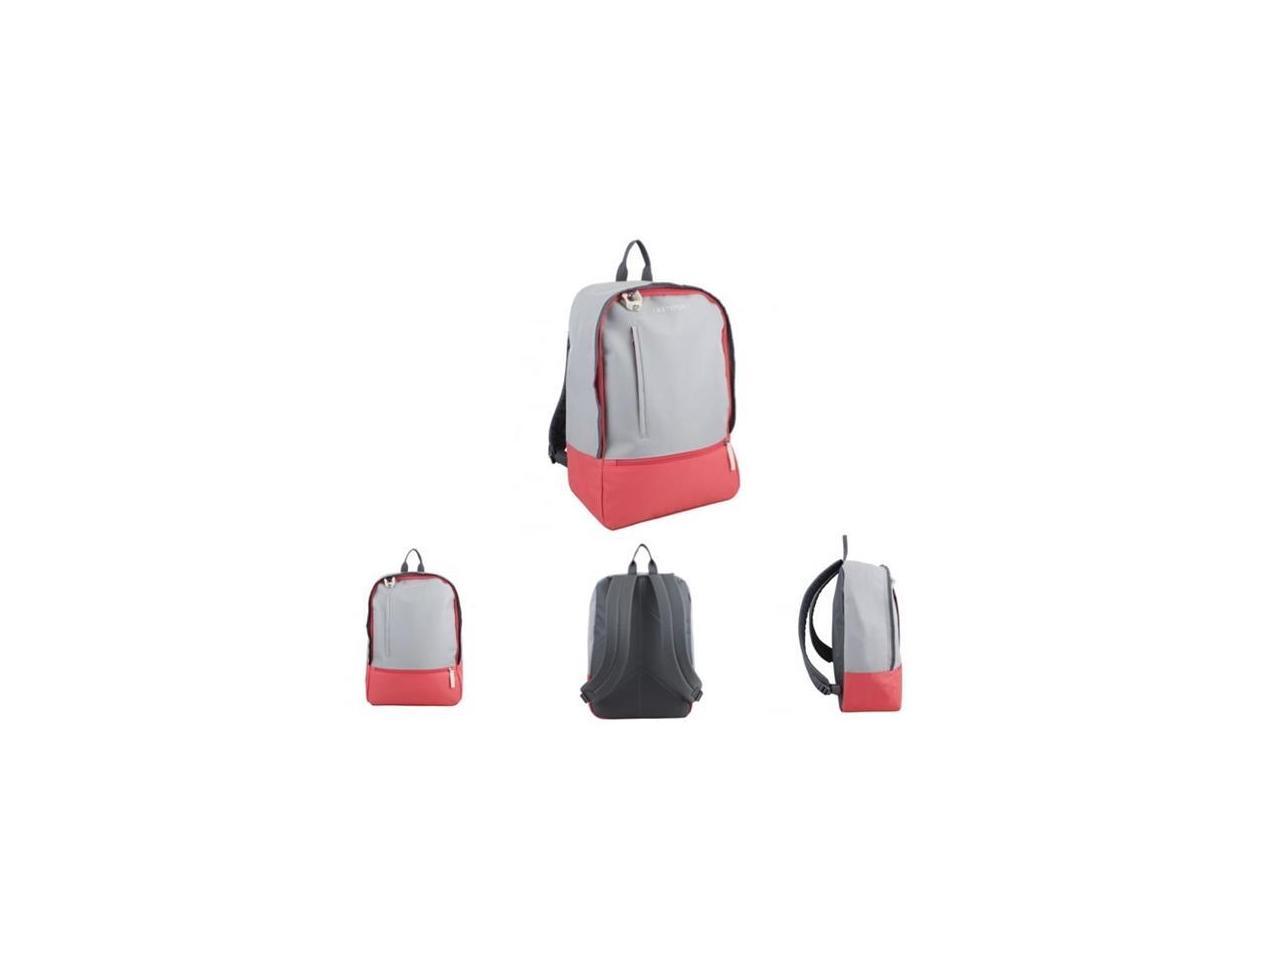 eastsport backpack with charger